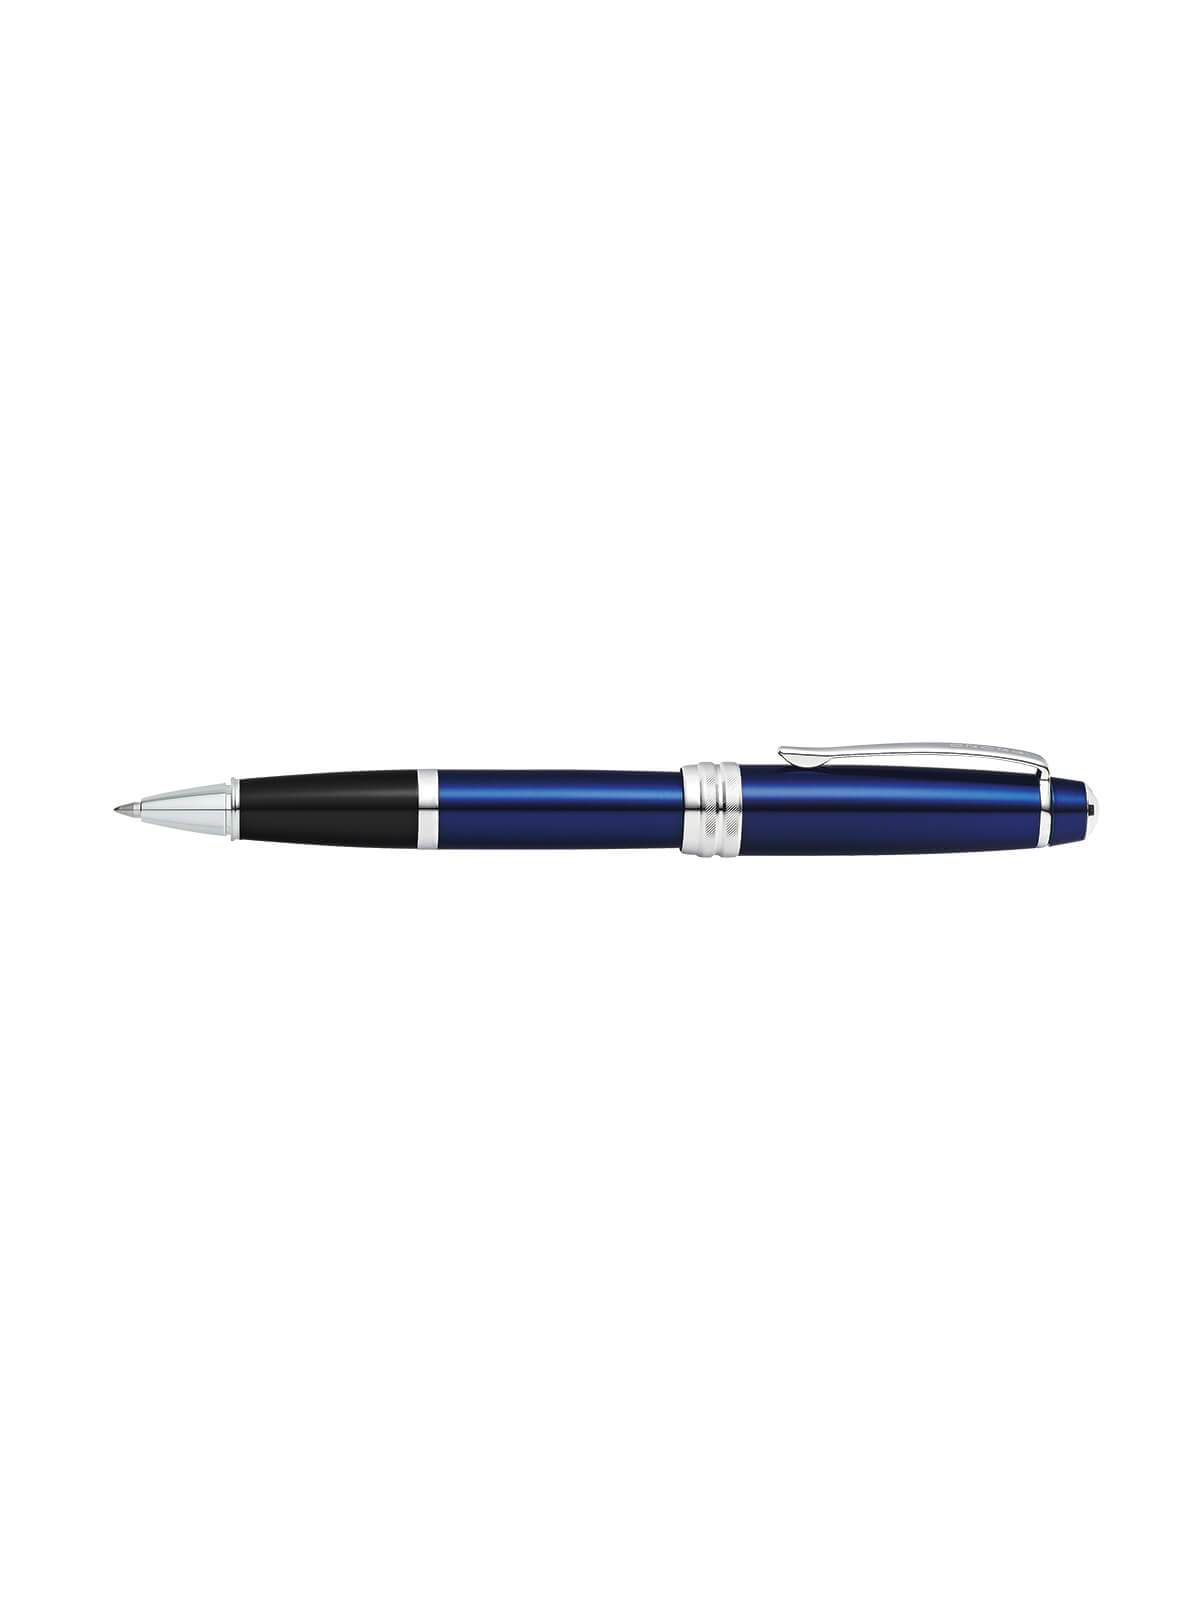 Cross Bailey Blue Lacquer Rollerball Pen AT0455-12